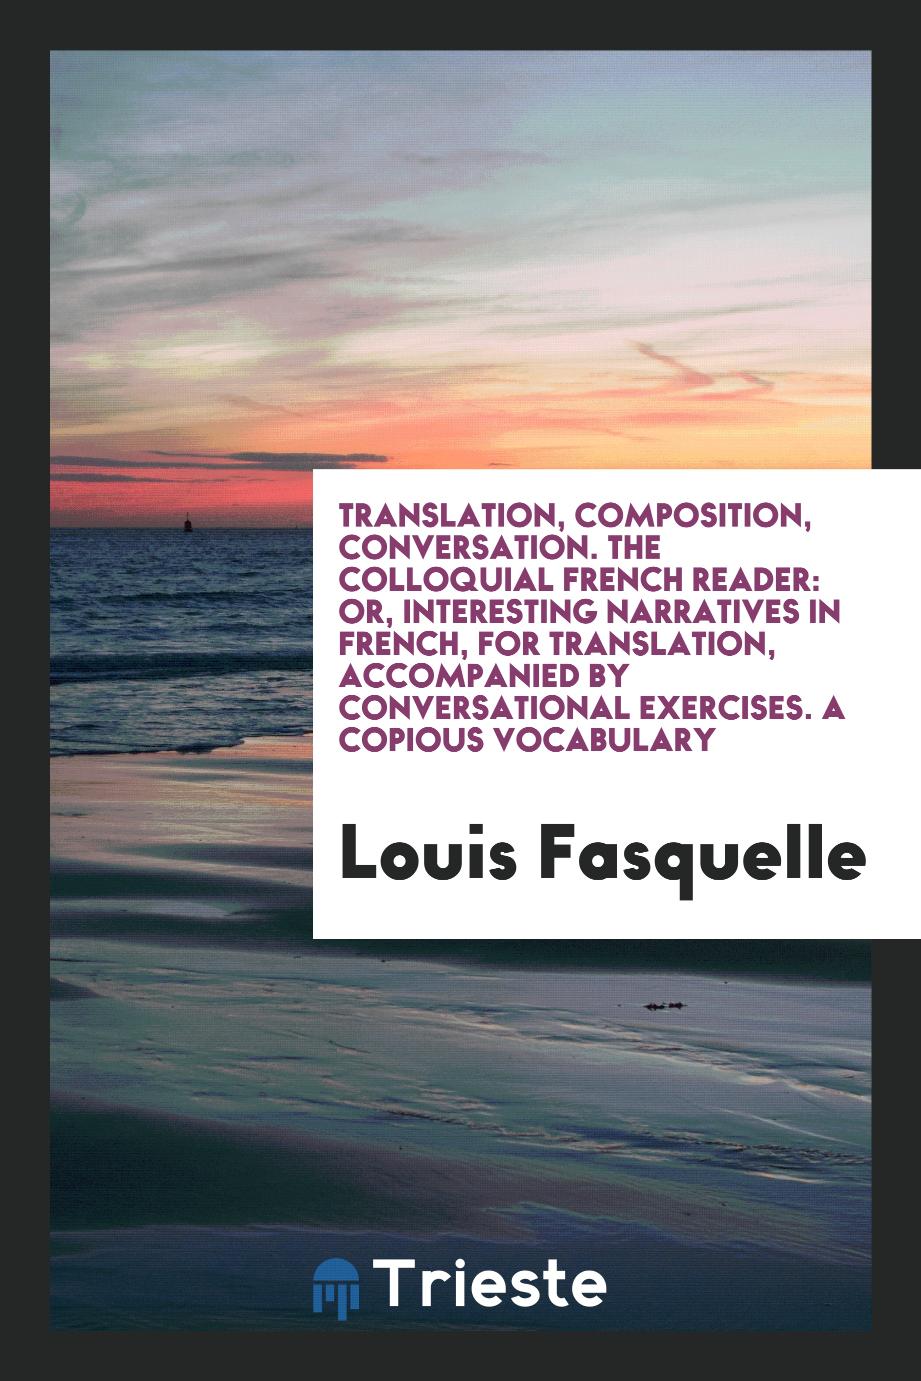 Translation, Composition, Conversation. The Colloquial French Reader: Or, Interesting Narratives in French, for Translation, Accompanied by Conversational Exercises. A Copious Vocabulary